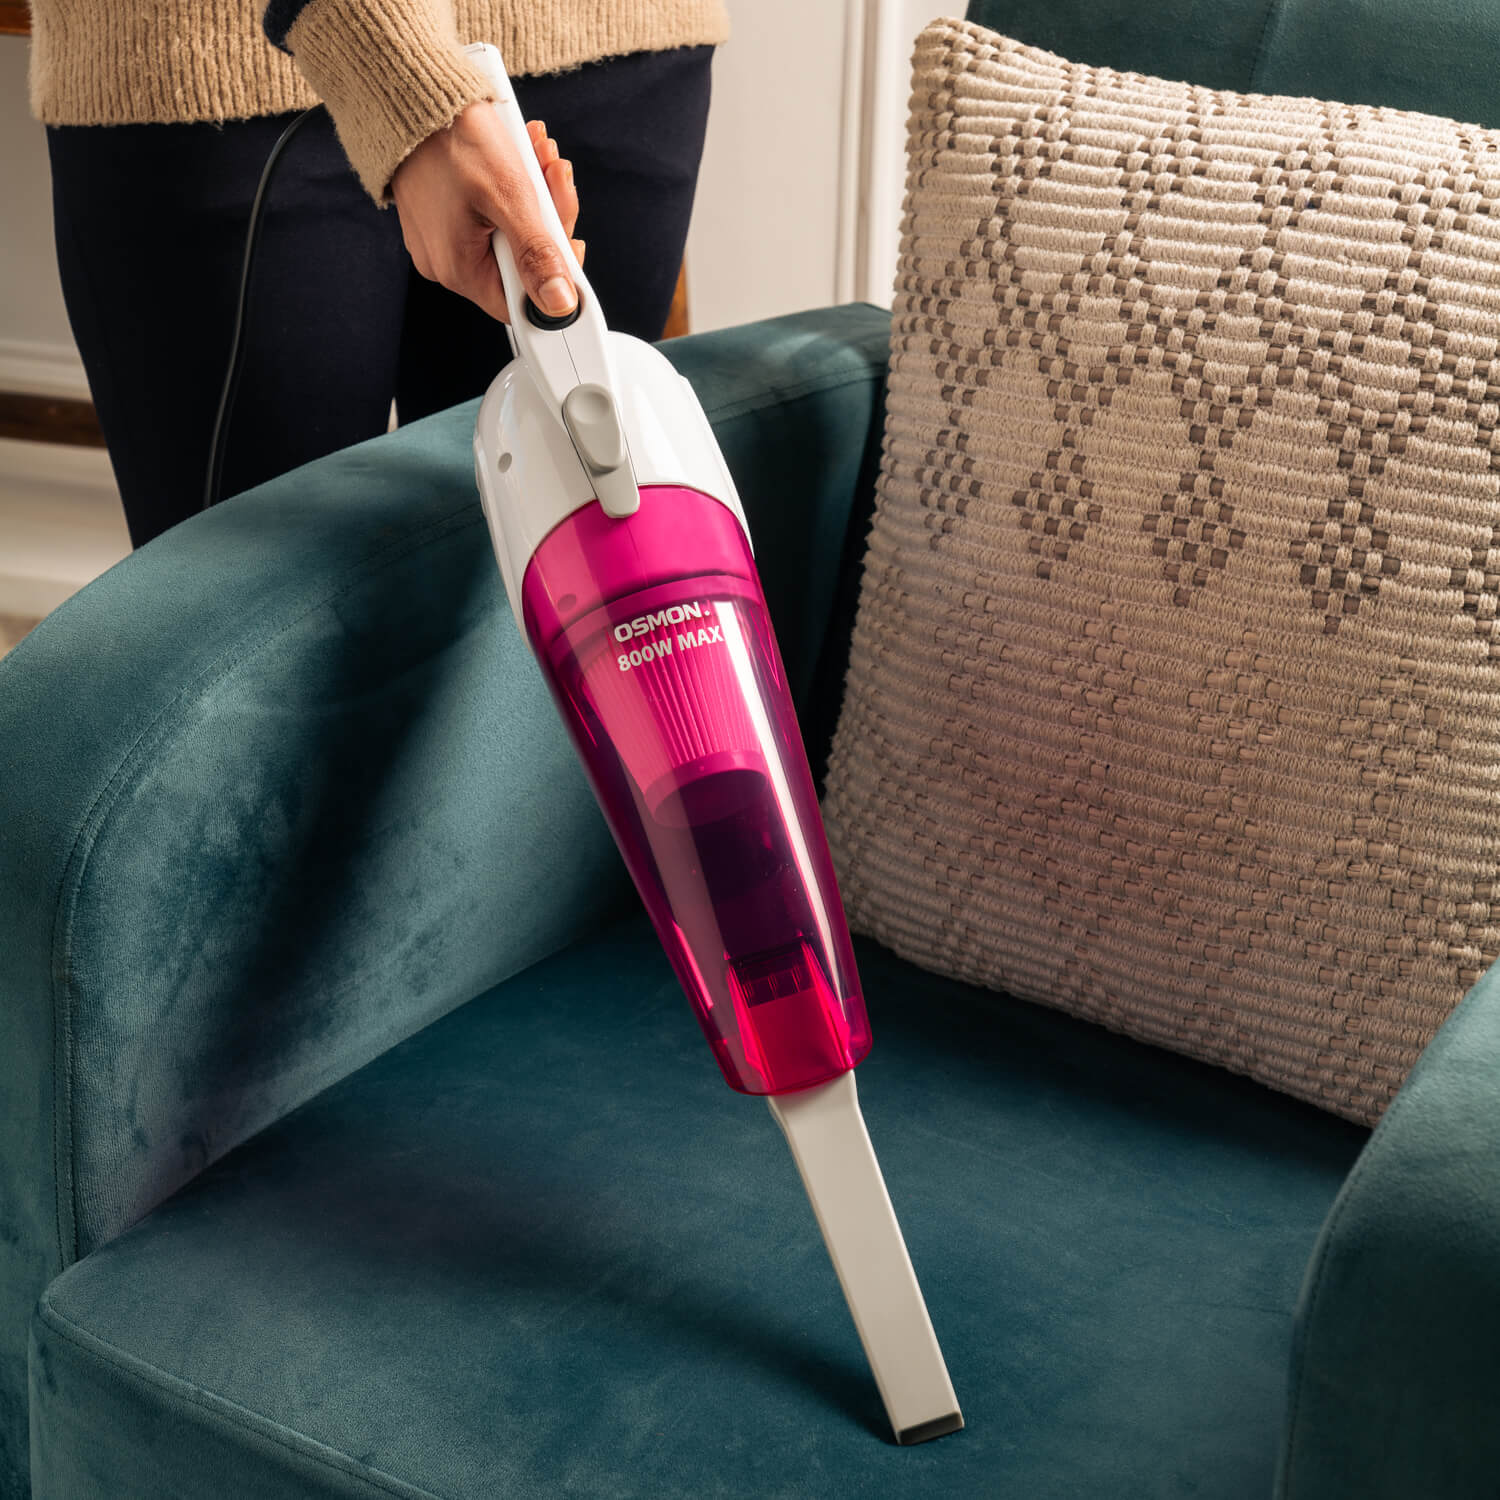 A 2-in-1 upright, handheld, and stick vacuum cleaner showcased in a modern home setting while cleaning a sofa